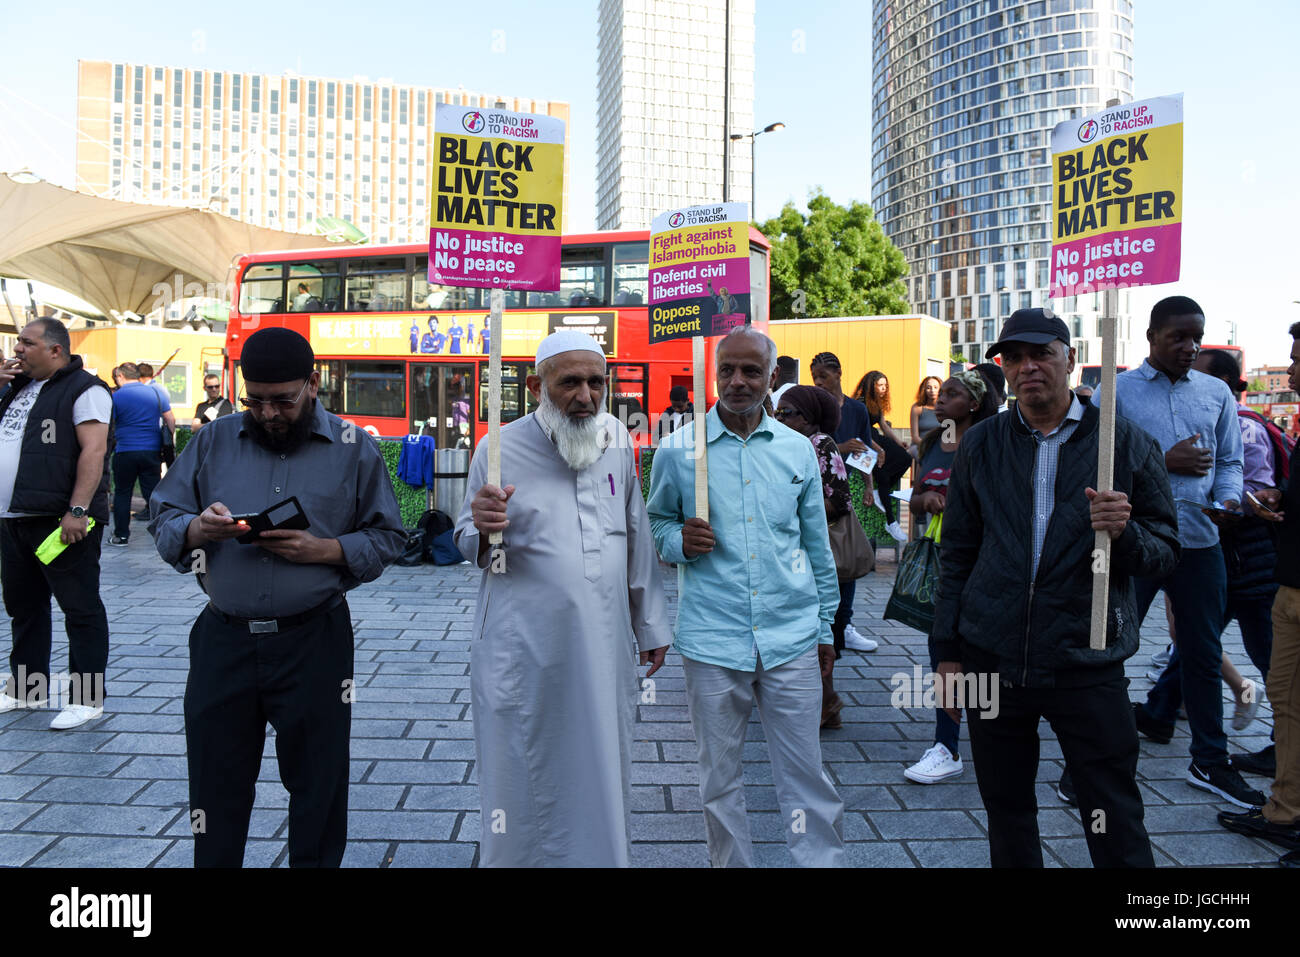 London, UK. 05th JUL 2017. 'STOP ACID ATTACKS' emergency protest -  people are holding placards reading 'Black Lives Matter' and 'Fight Against Islamophobia' outside the Stratford station in East London. Credit: ZEN - Zaneta Razaite / Alamy Live News Stock Photo